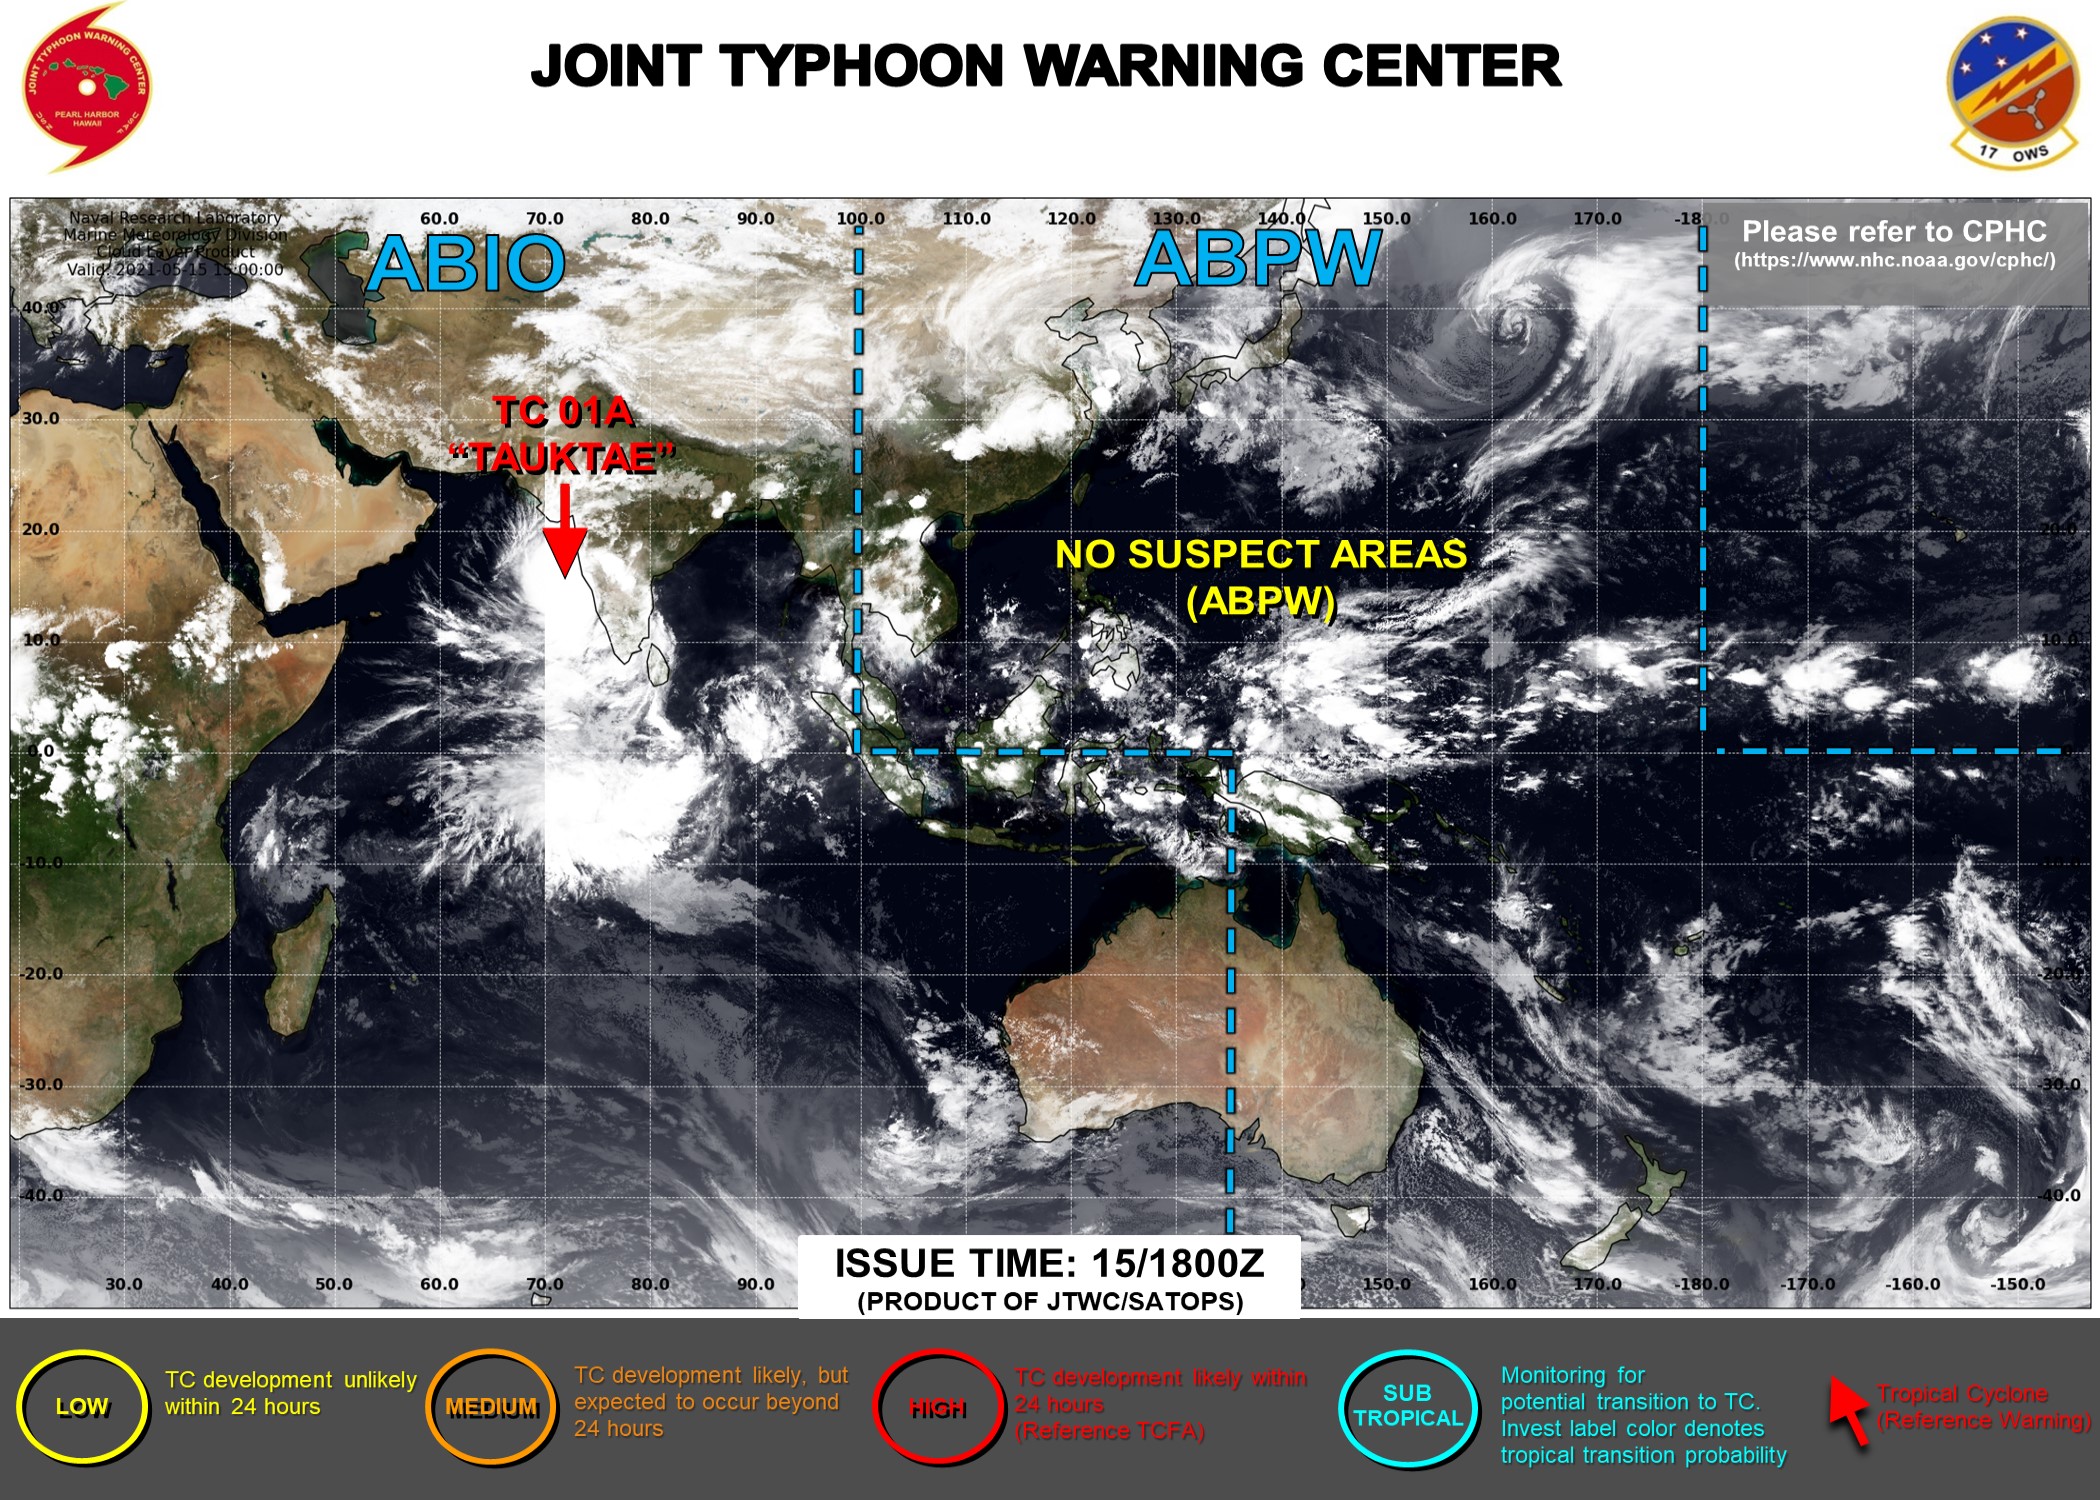 JTWC IS ISSUING 6HOURLY WARNINGS AND 3HOURLY SATELLITE BULLETINS ON TC 01A(TAUKTAE).